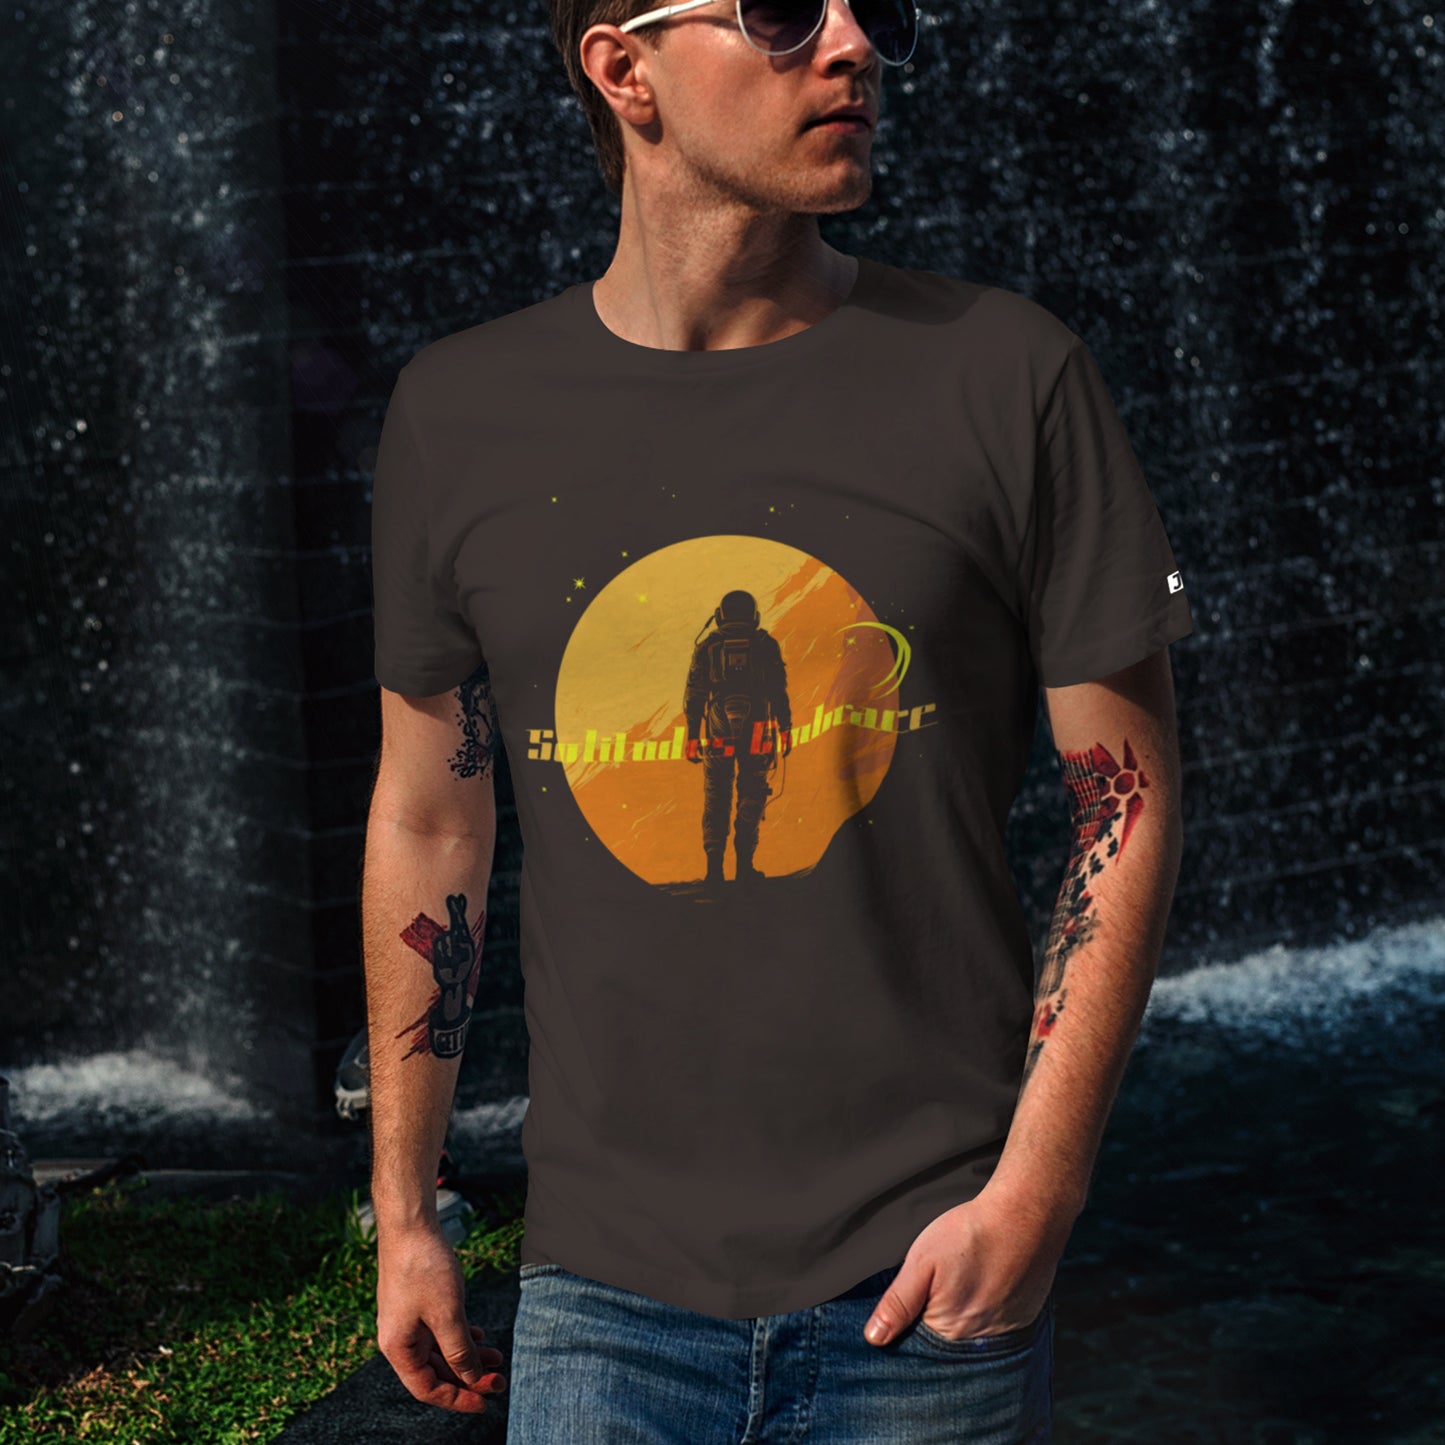 Solitudes Embrace Unisex t-shirt- in brown- worn by model outdoors